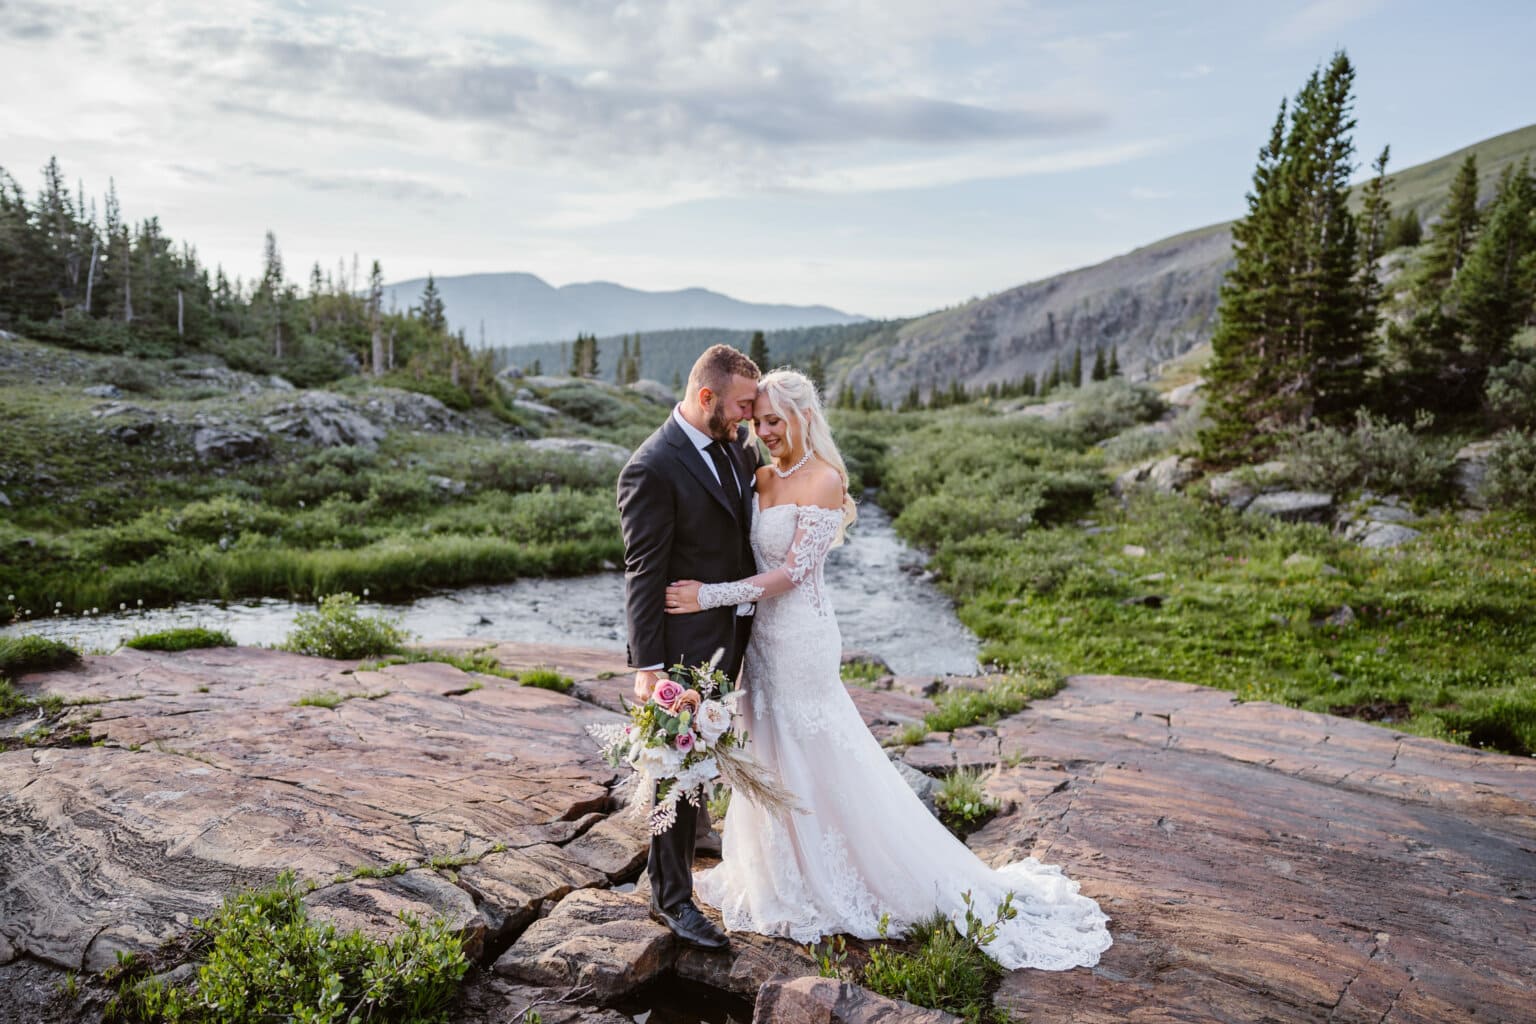 A bride and groom sharing a laugh on their elopement near a waterfall at sunrise in Colorado.